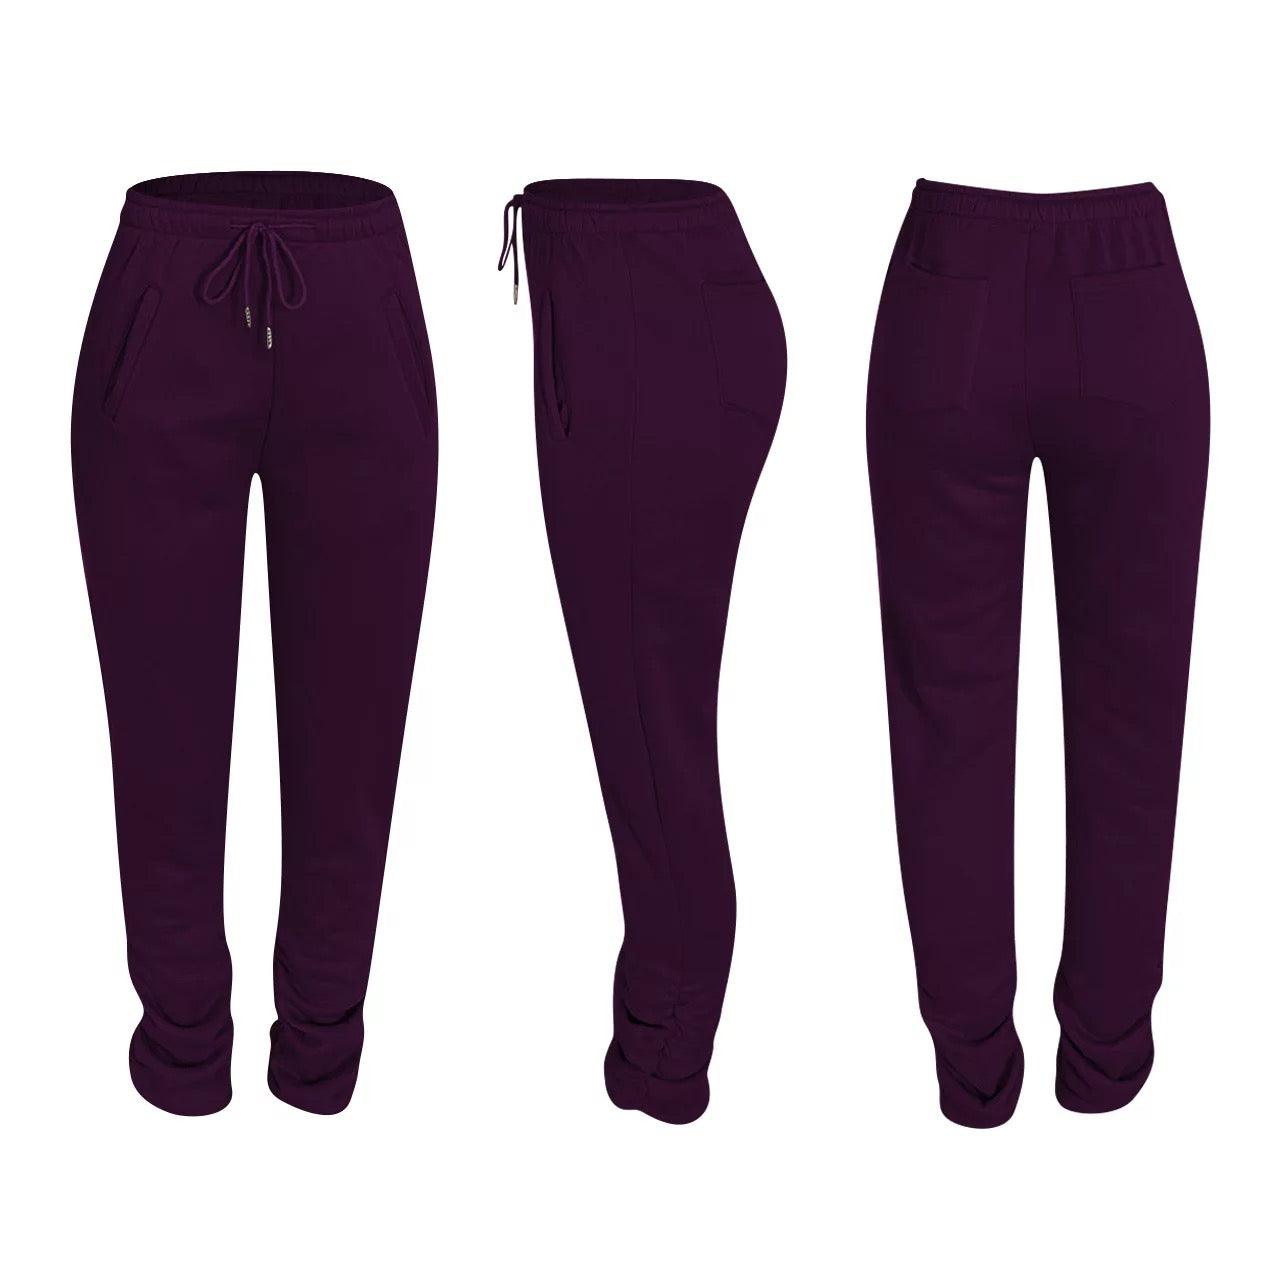 Chase The Bag Stacked Jogger Sweatpants - Dezired Beauty Boutique